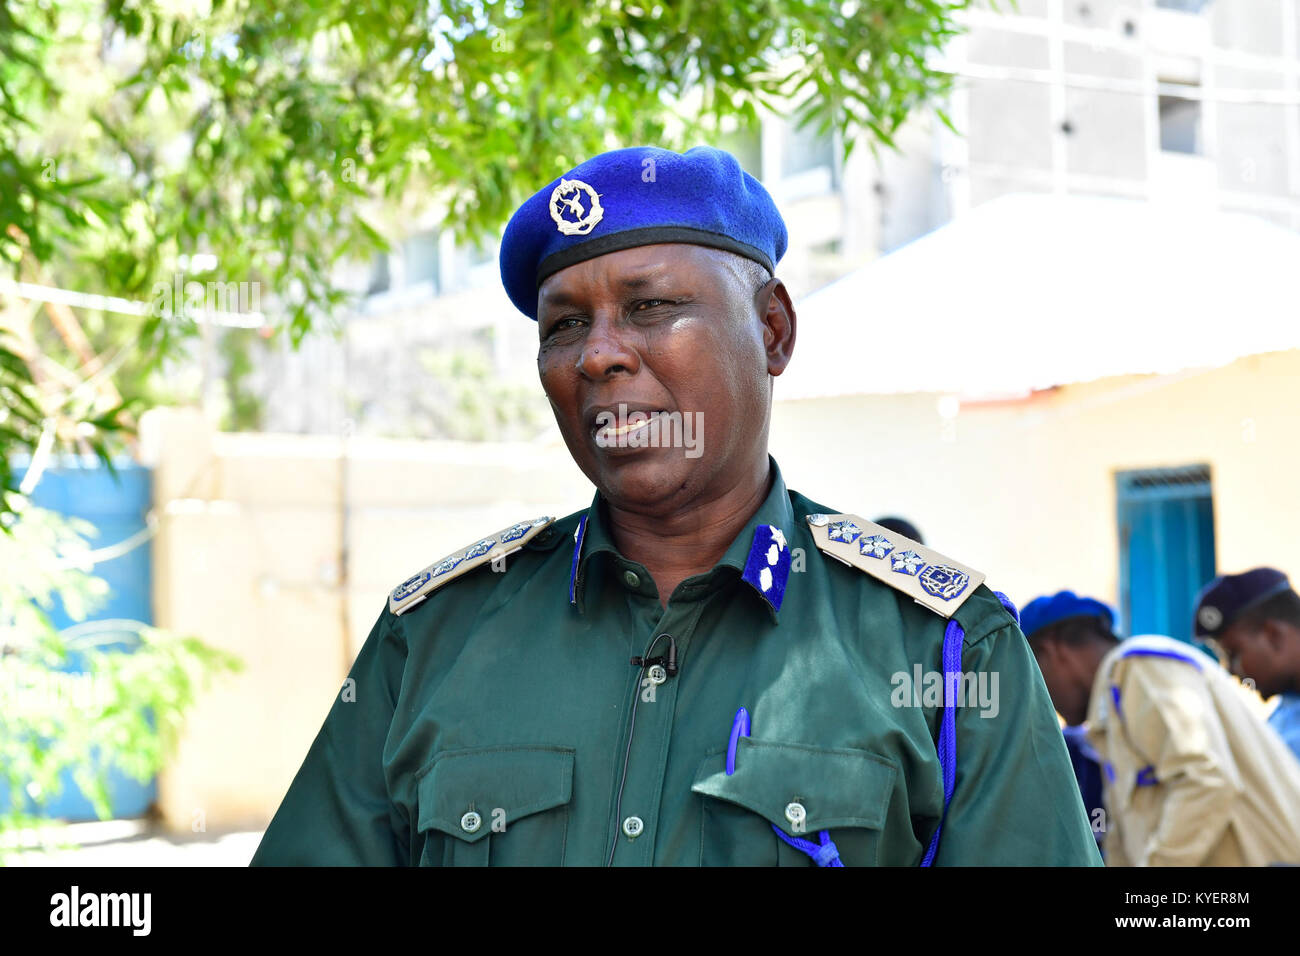 Gen. Ahmed Hassan Maalim, the Somali Police Force (SPF) Banadir region Police Commissioner speaks during a ceremony in which the African Union Mission in Somalia (AMISOM) Police Component handed over office equipment to the Somali Police Force in Mogadishu, Somalia on September 18, 2017. AMISOM Photo / Atulinda Allan Stock Photo